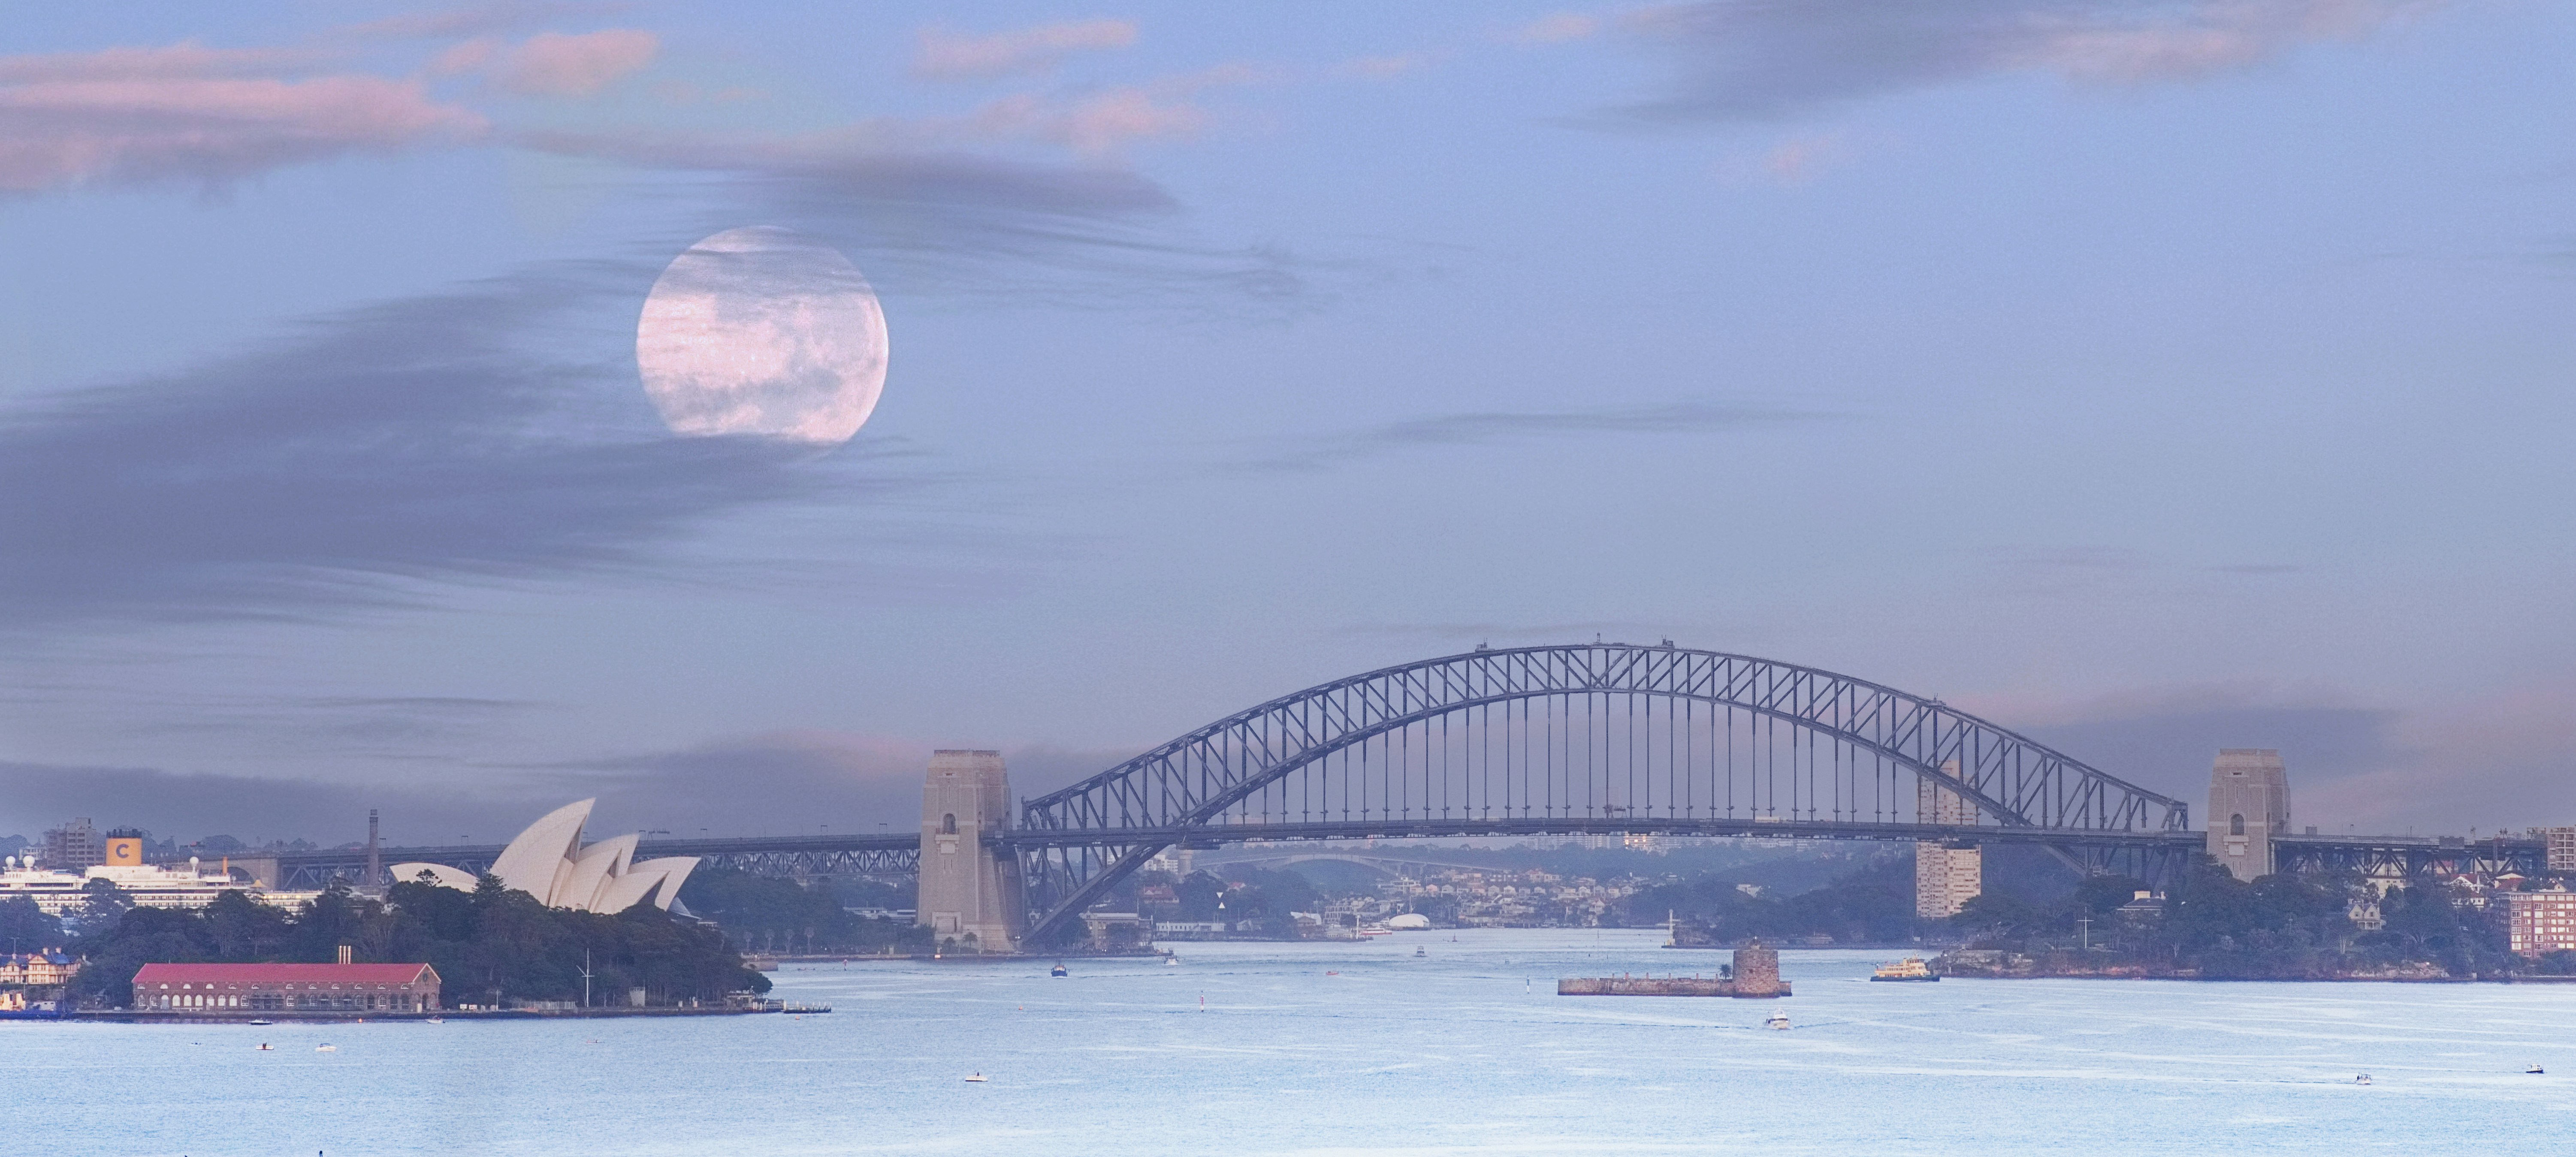 There’s only a few times each year that the full moon sets behind the Sydney Harbour Bridge in this composition, and I’d planned this shot weeks in advance. This was taken after dawn on a cold Saturday morning in between the clouds. In person the full moon is a grand sight moving quickly through the sky towards the city. In this shot I’ve tried to evoke how I felt standing there watching it balanced between these two Sydney icons, which - open disclosure - required some adjustment to the moon size.